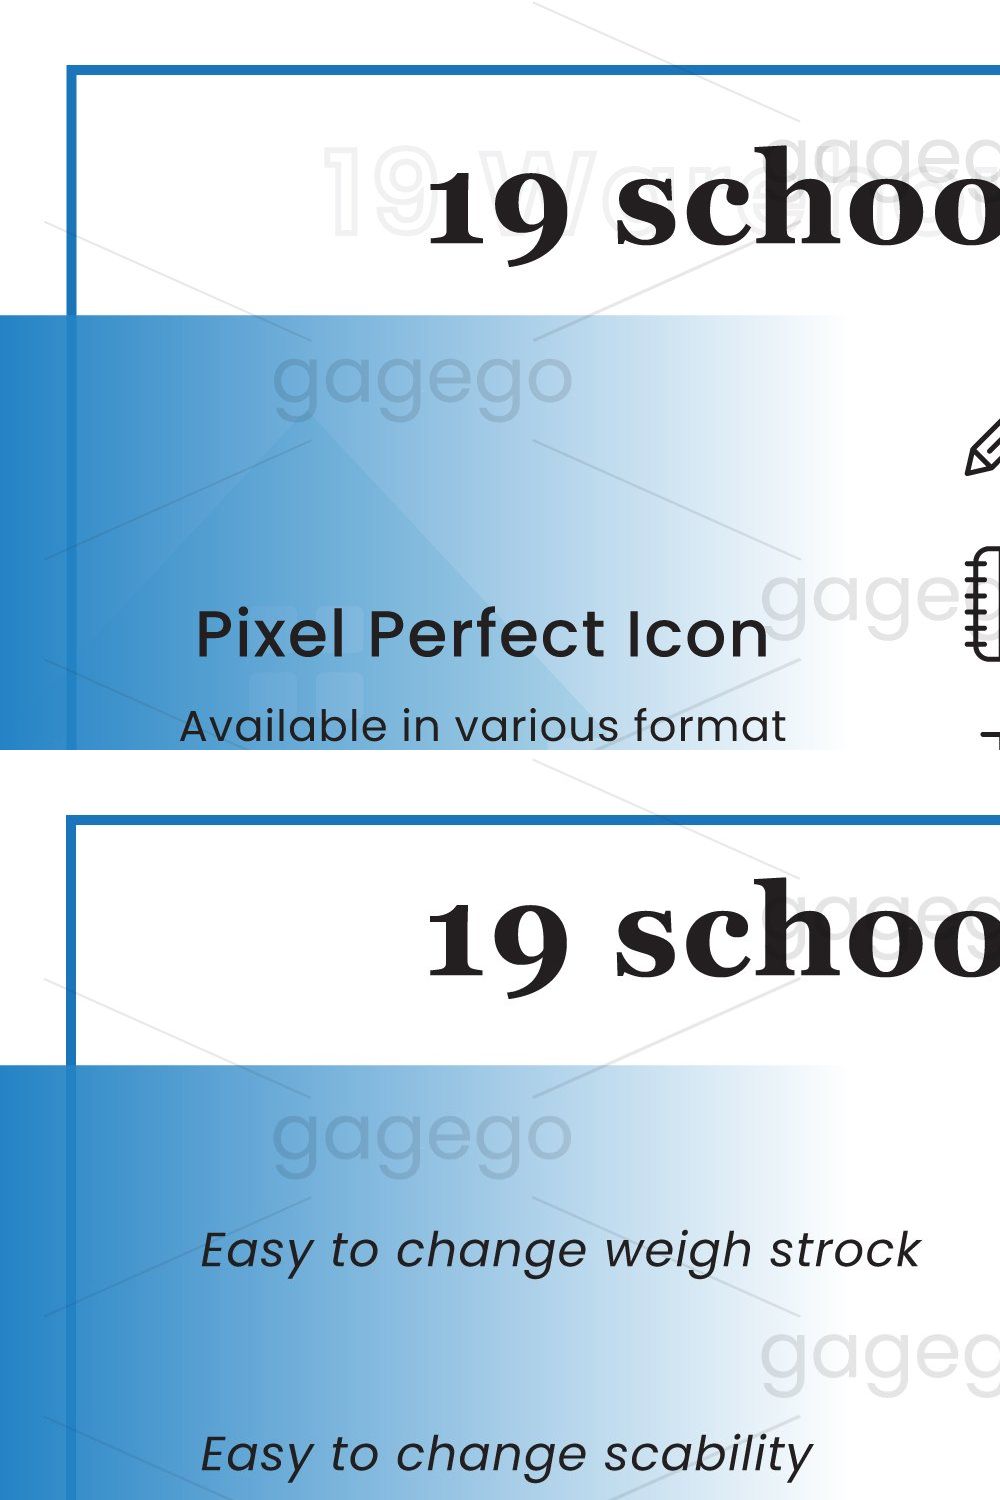 School education icon pinterest preview image.